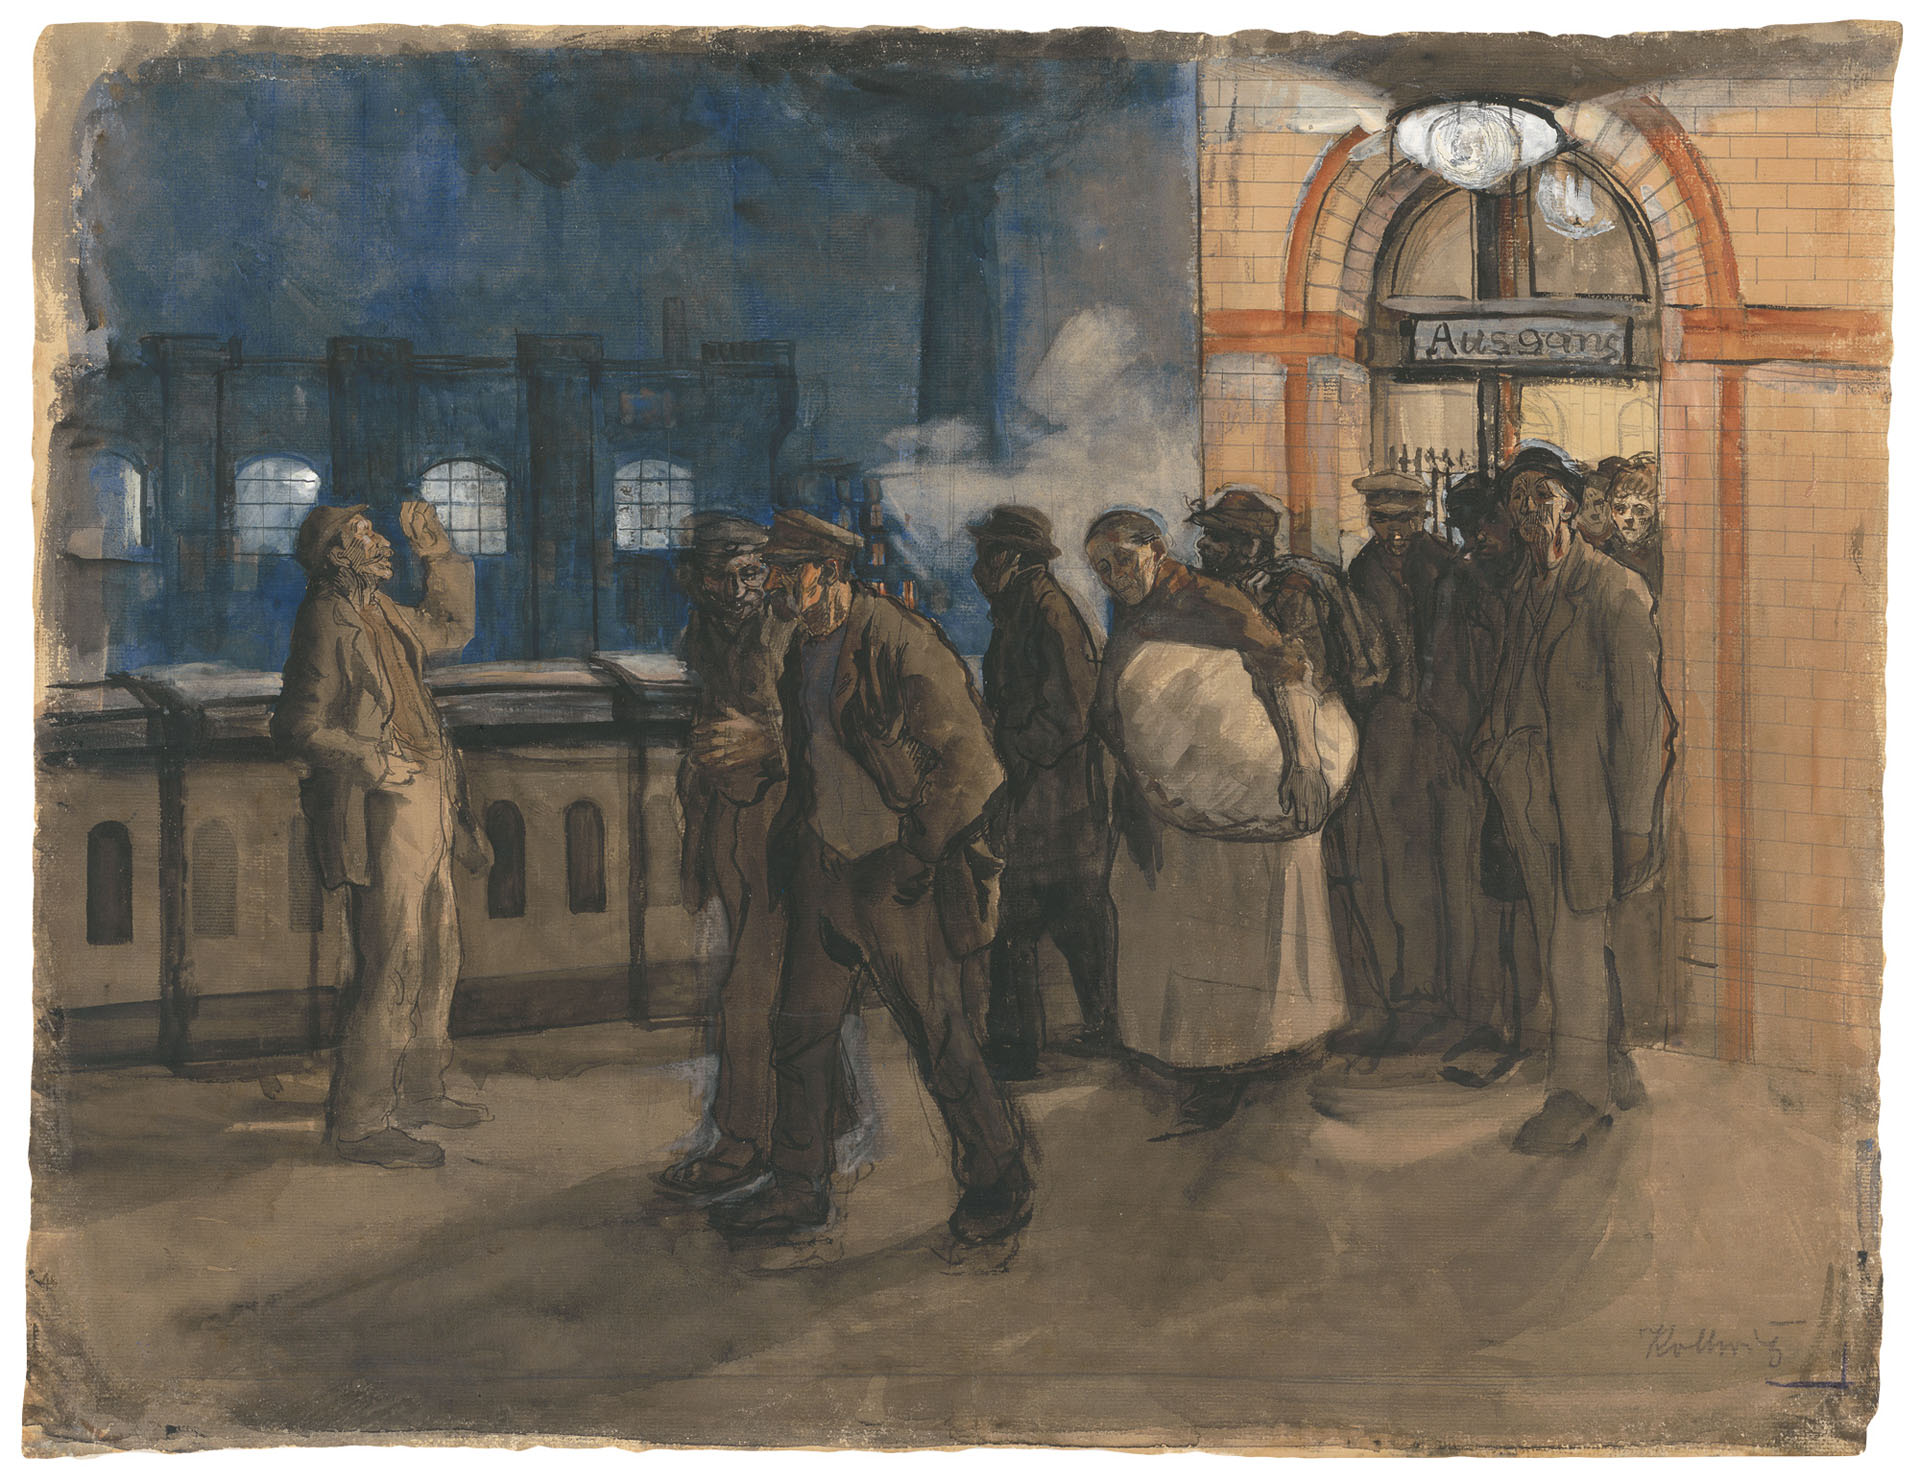 Käthe Kollwitz, Workers Coming from the Station (Prenzlauer Allee Station), 1897-1899, brush and watercolour, heightened with white, on Ingres paper, NT 146, Cologne Kollwitz Collection © Käthe Kollwitz Museum Köln